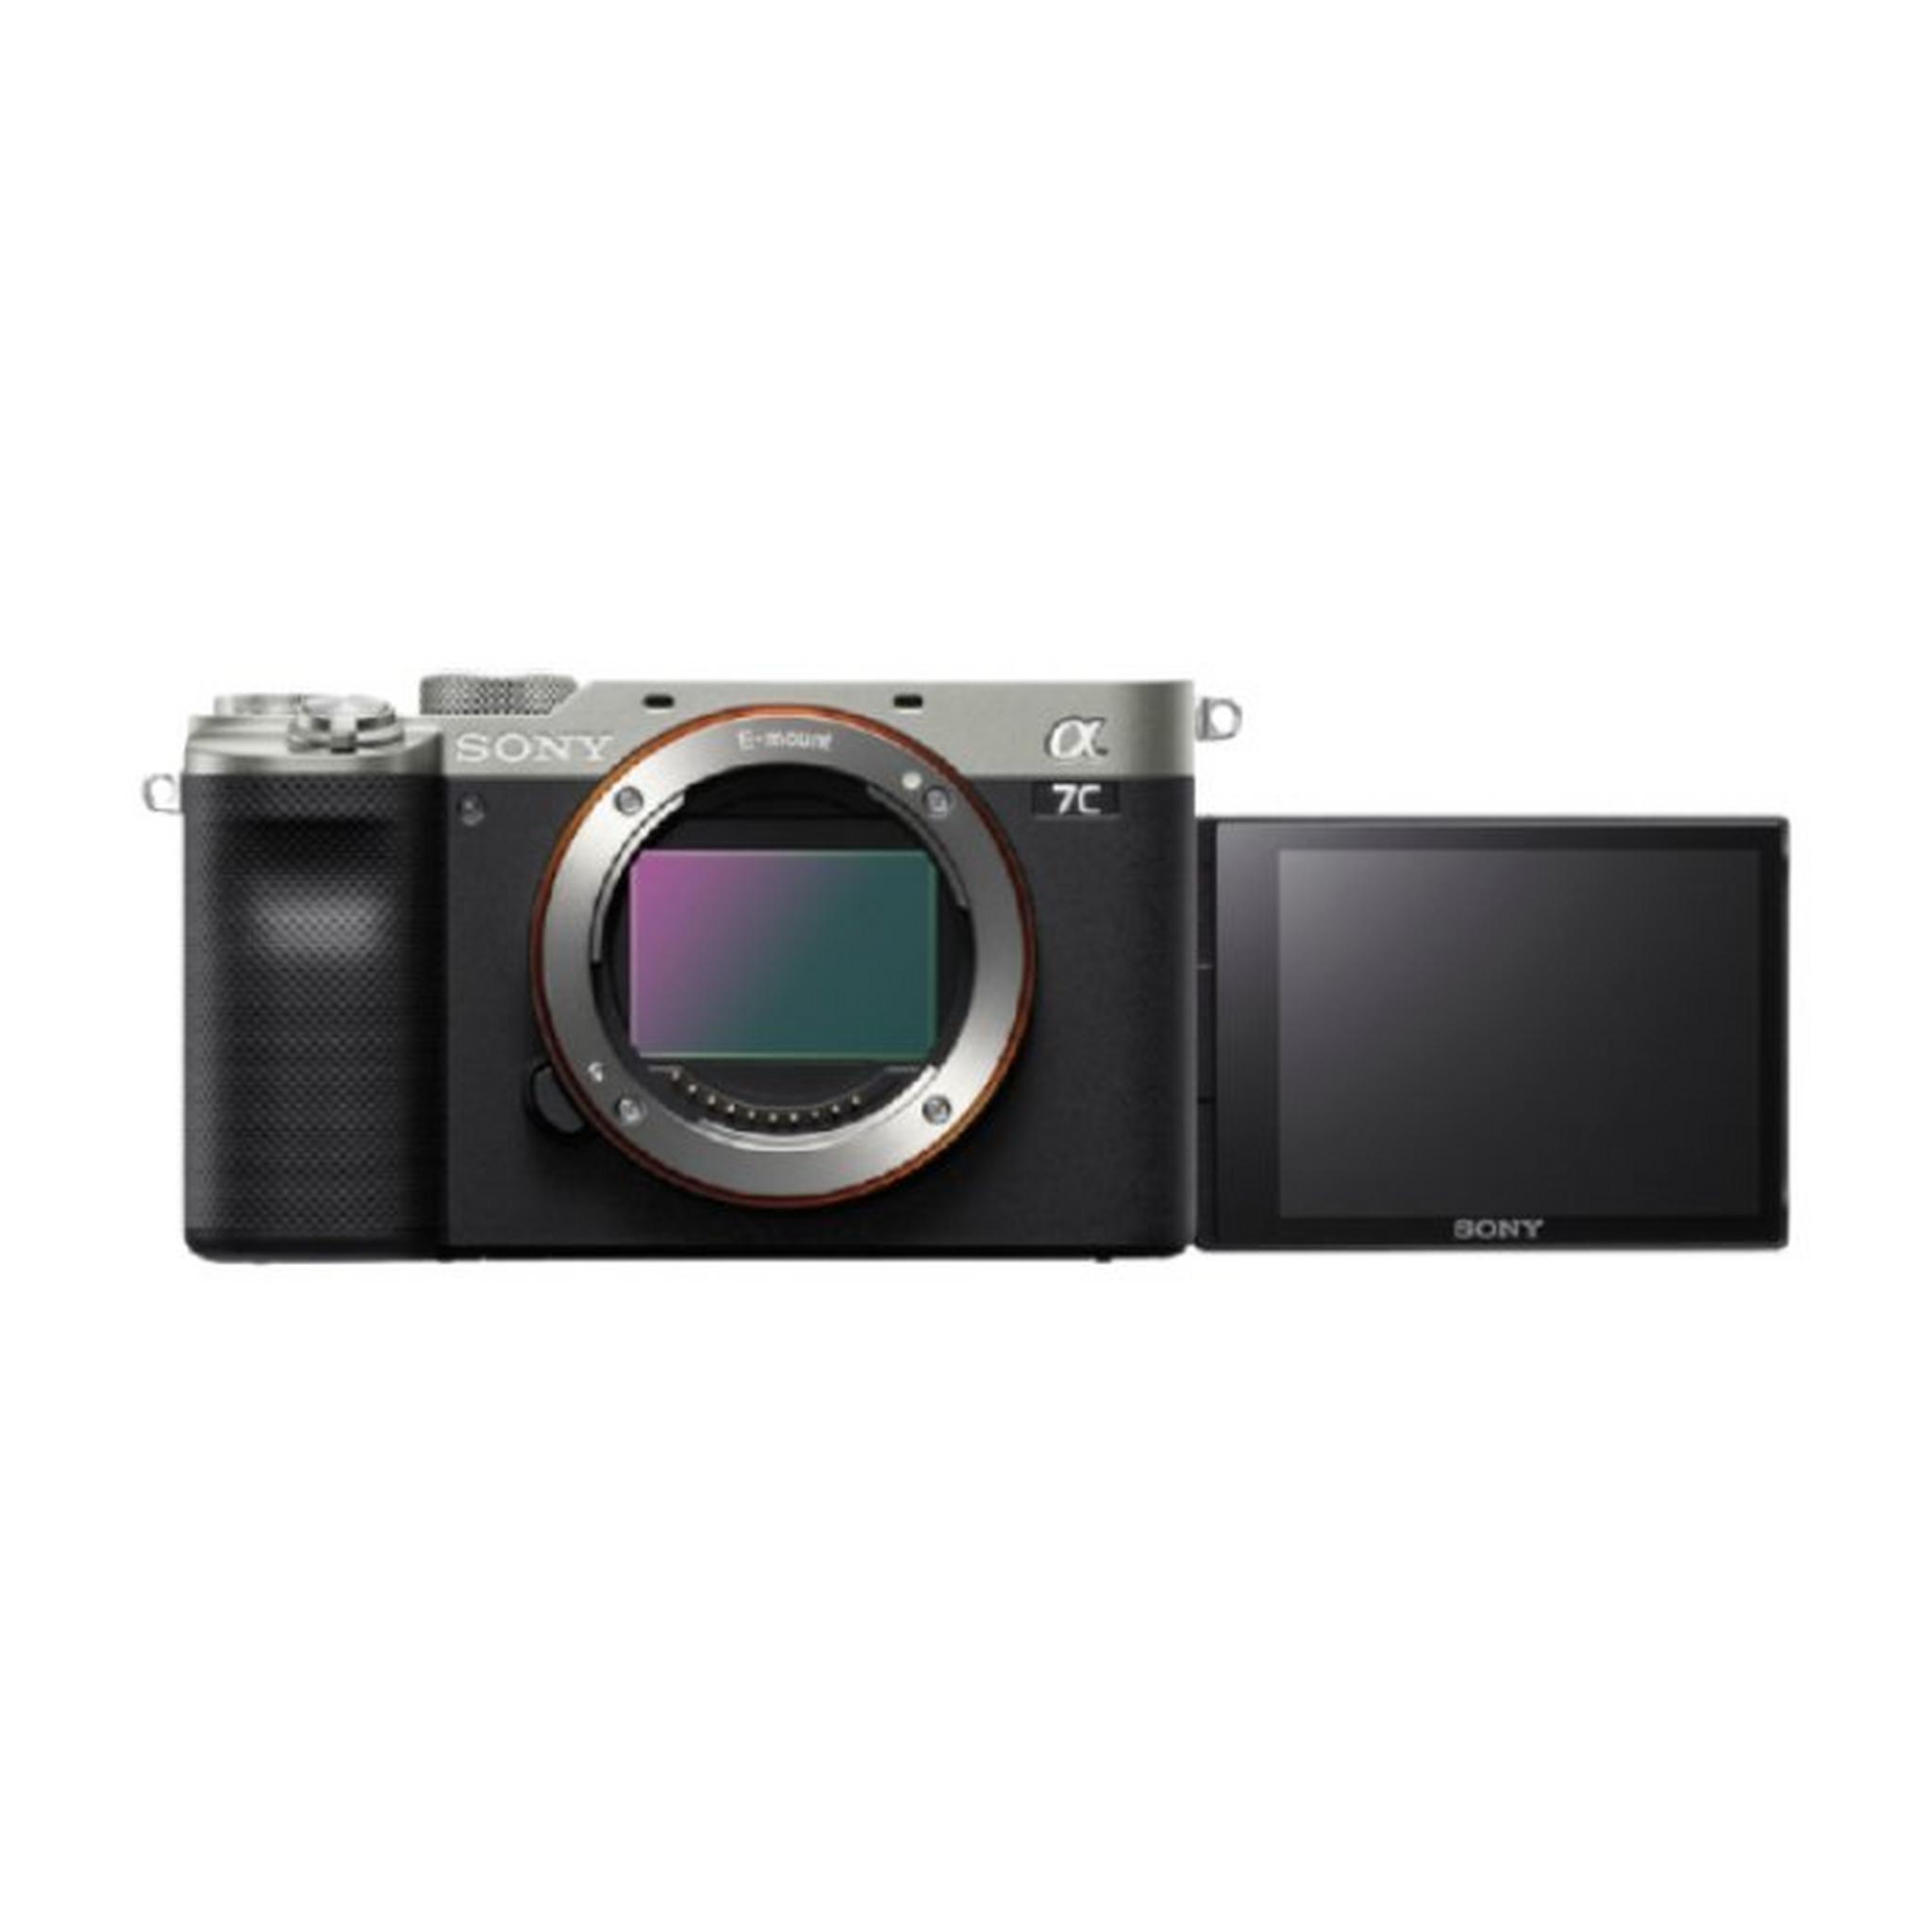 Sony Alpha 7C Compact Full-Frame Mirrorless Camera - Silver